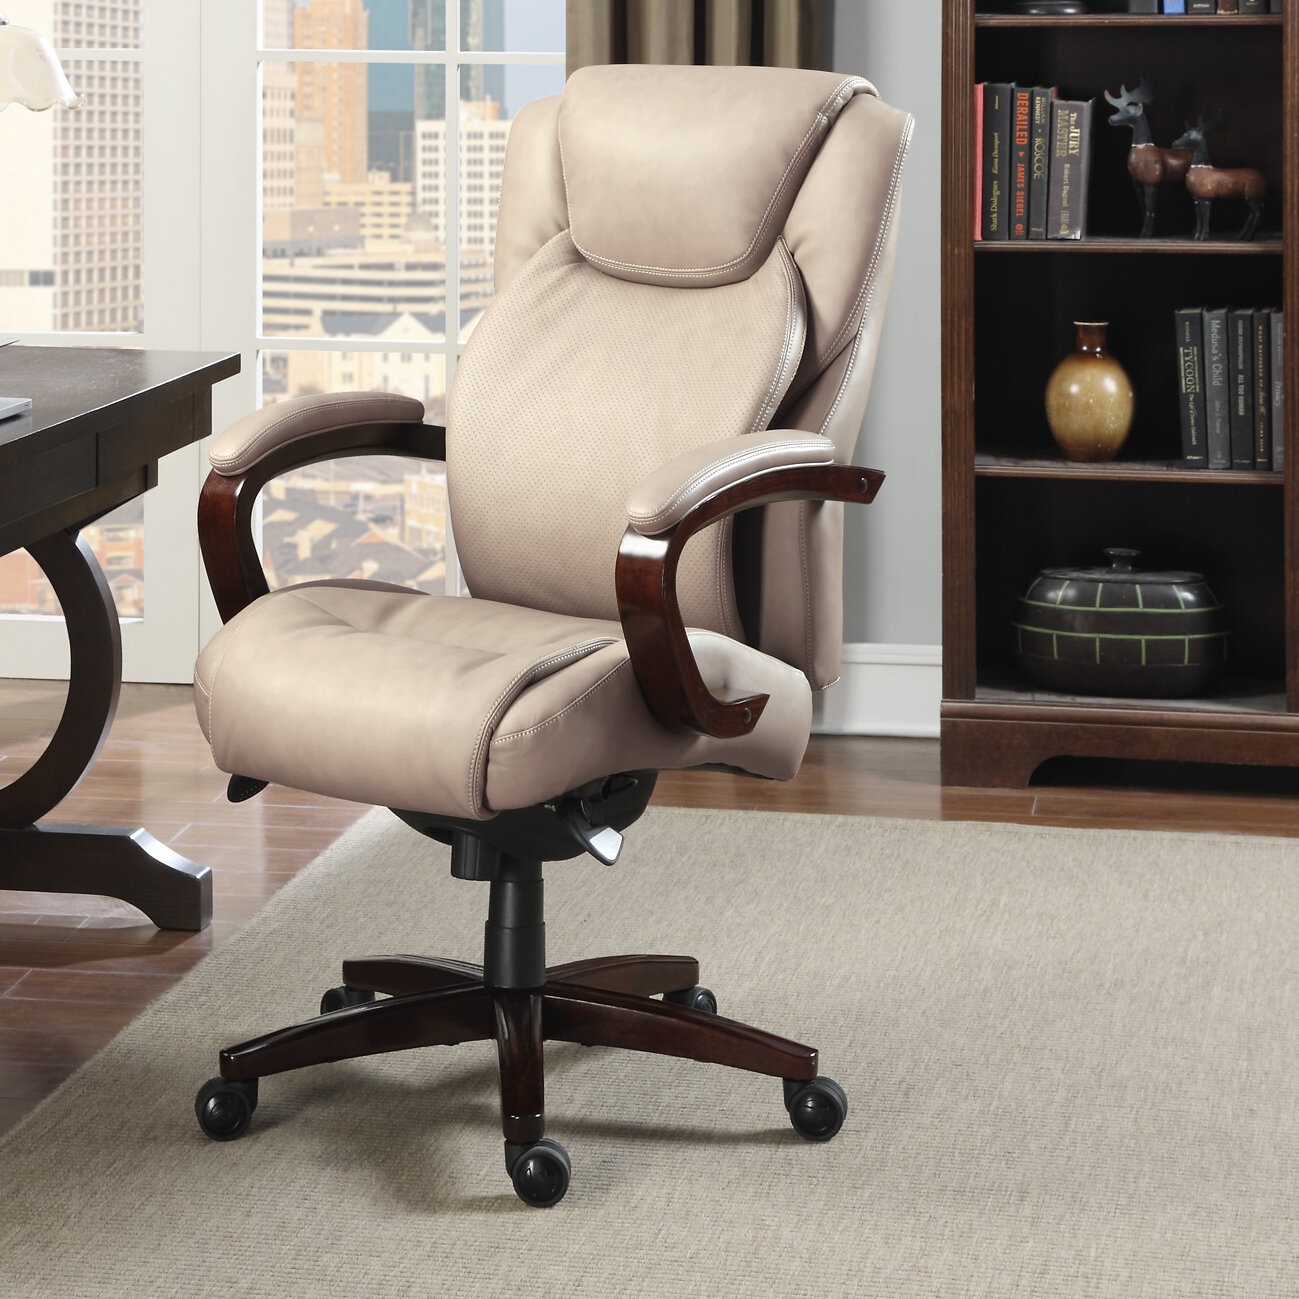 Home Office Desk Chairs Home Office Furniture La Z Boy 45780 Linden Comfortcore Traditions Air Technology Executive Office Chair Home Taupe Home Office Furniture Kopa Or Kr